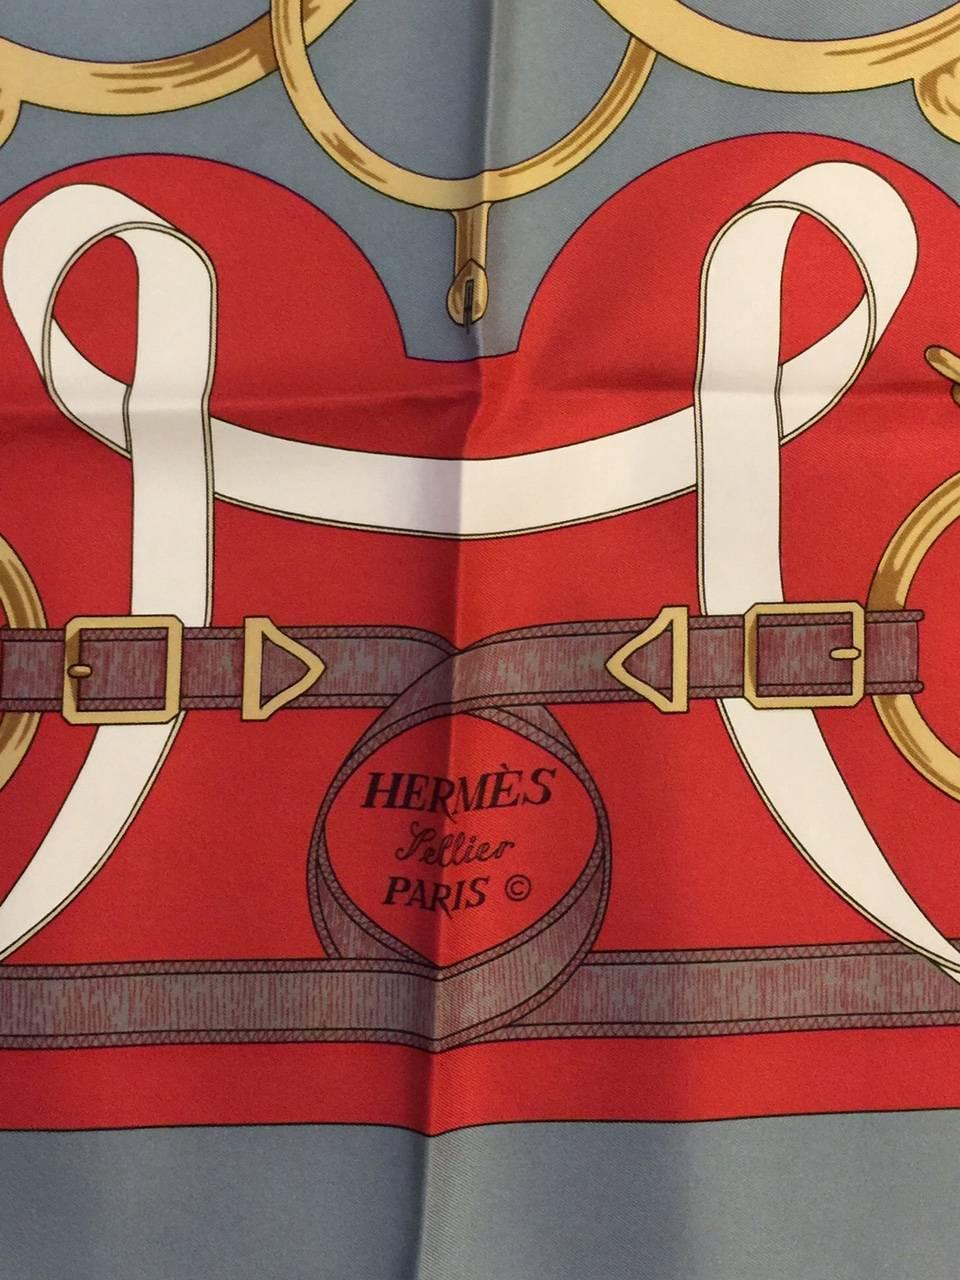 Designed by famed artist Henri d'Origny, Eperon d'Or was first issued in 1974. Hermes 100% SilkTwill Scarf was reissued in 2010 and features a modern and crisp color combination of steel grey and brick red metal balanced with gold and white.  